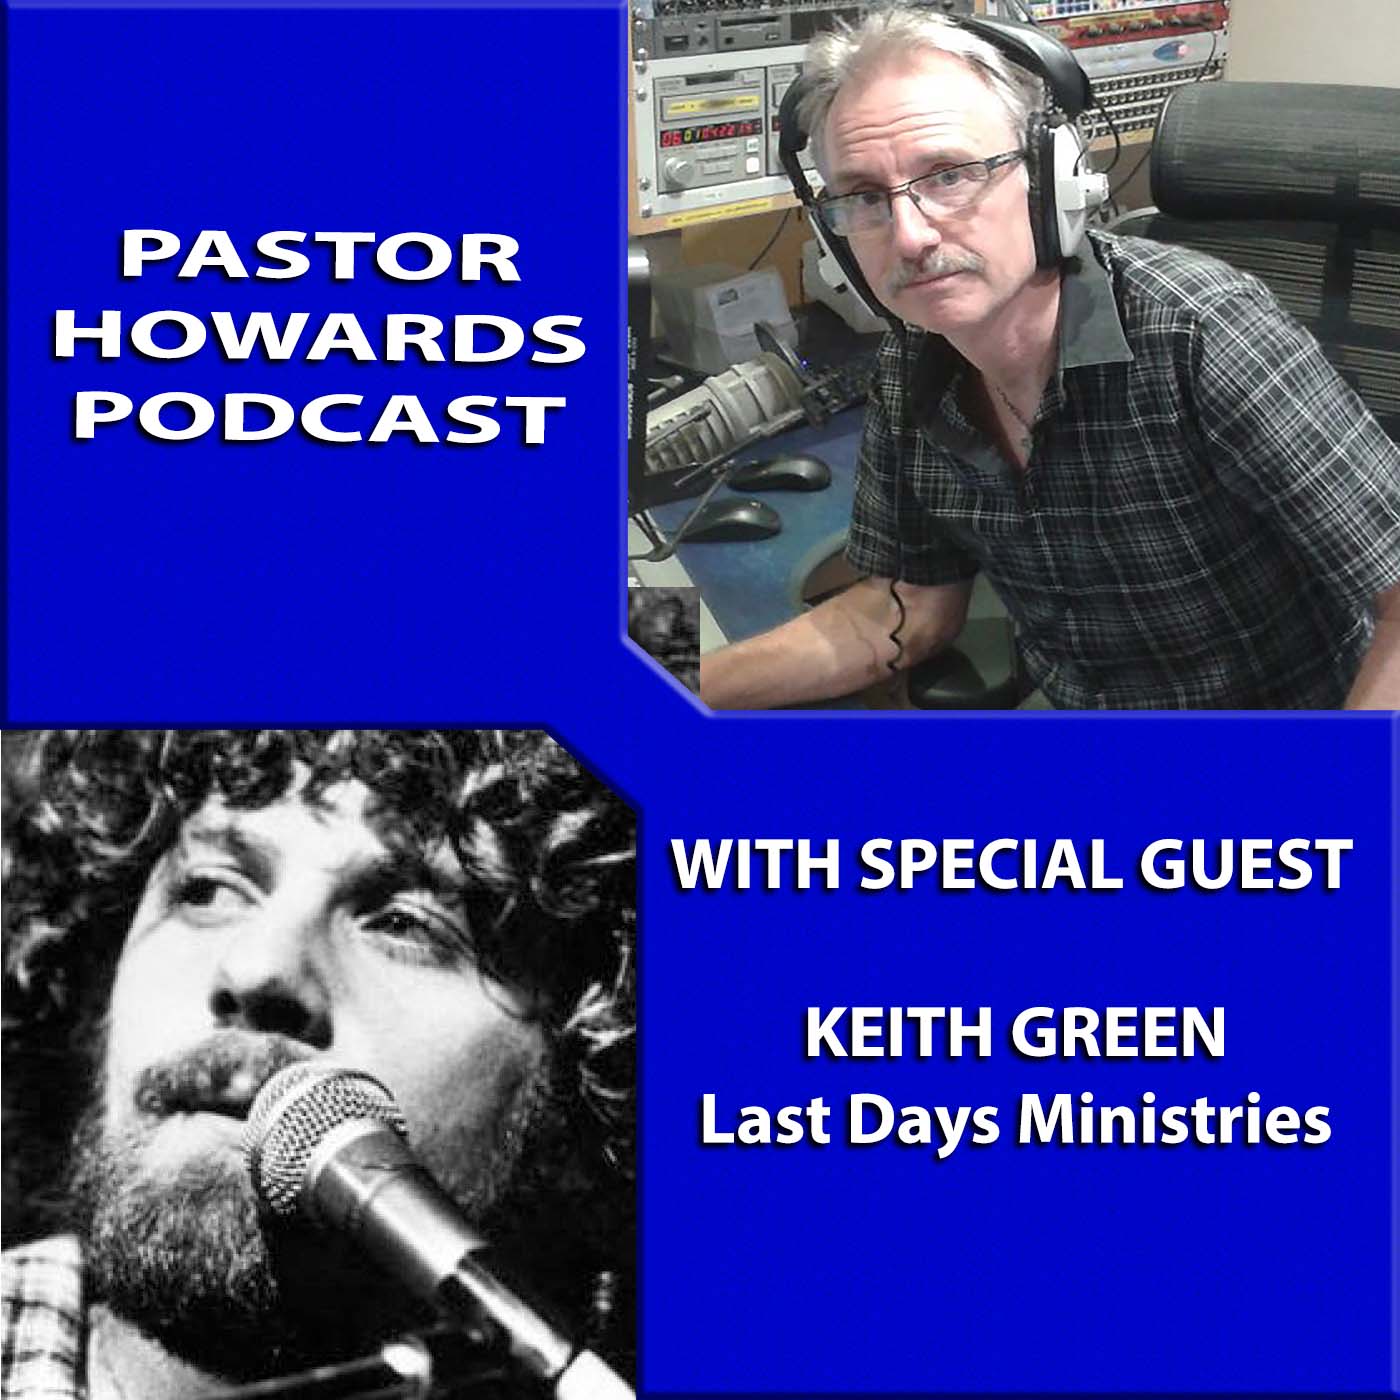 TWO REVS KEITH GREEN PODCAST